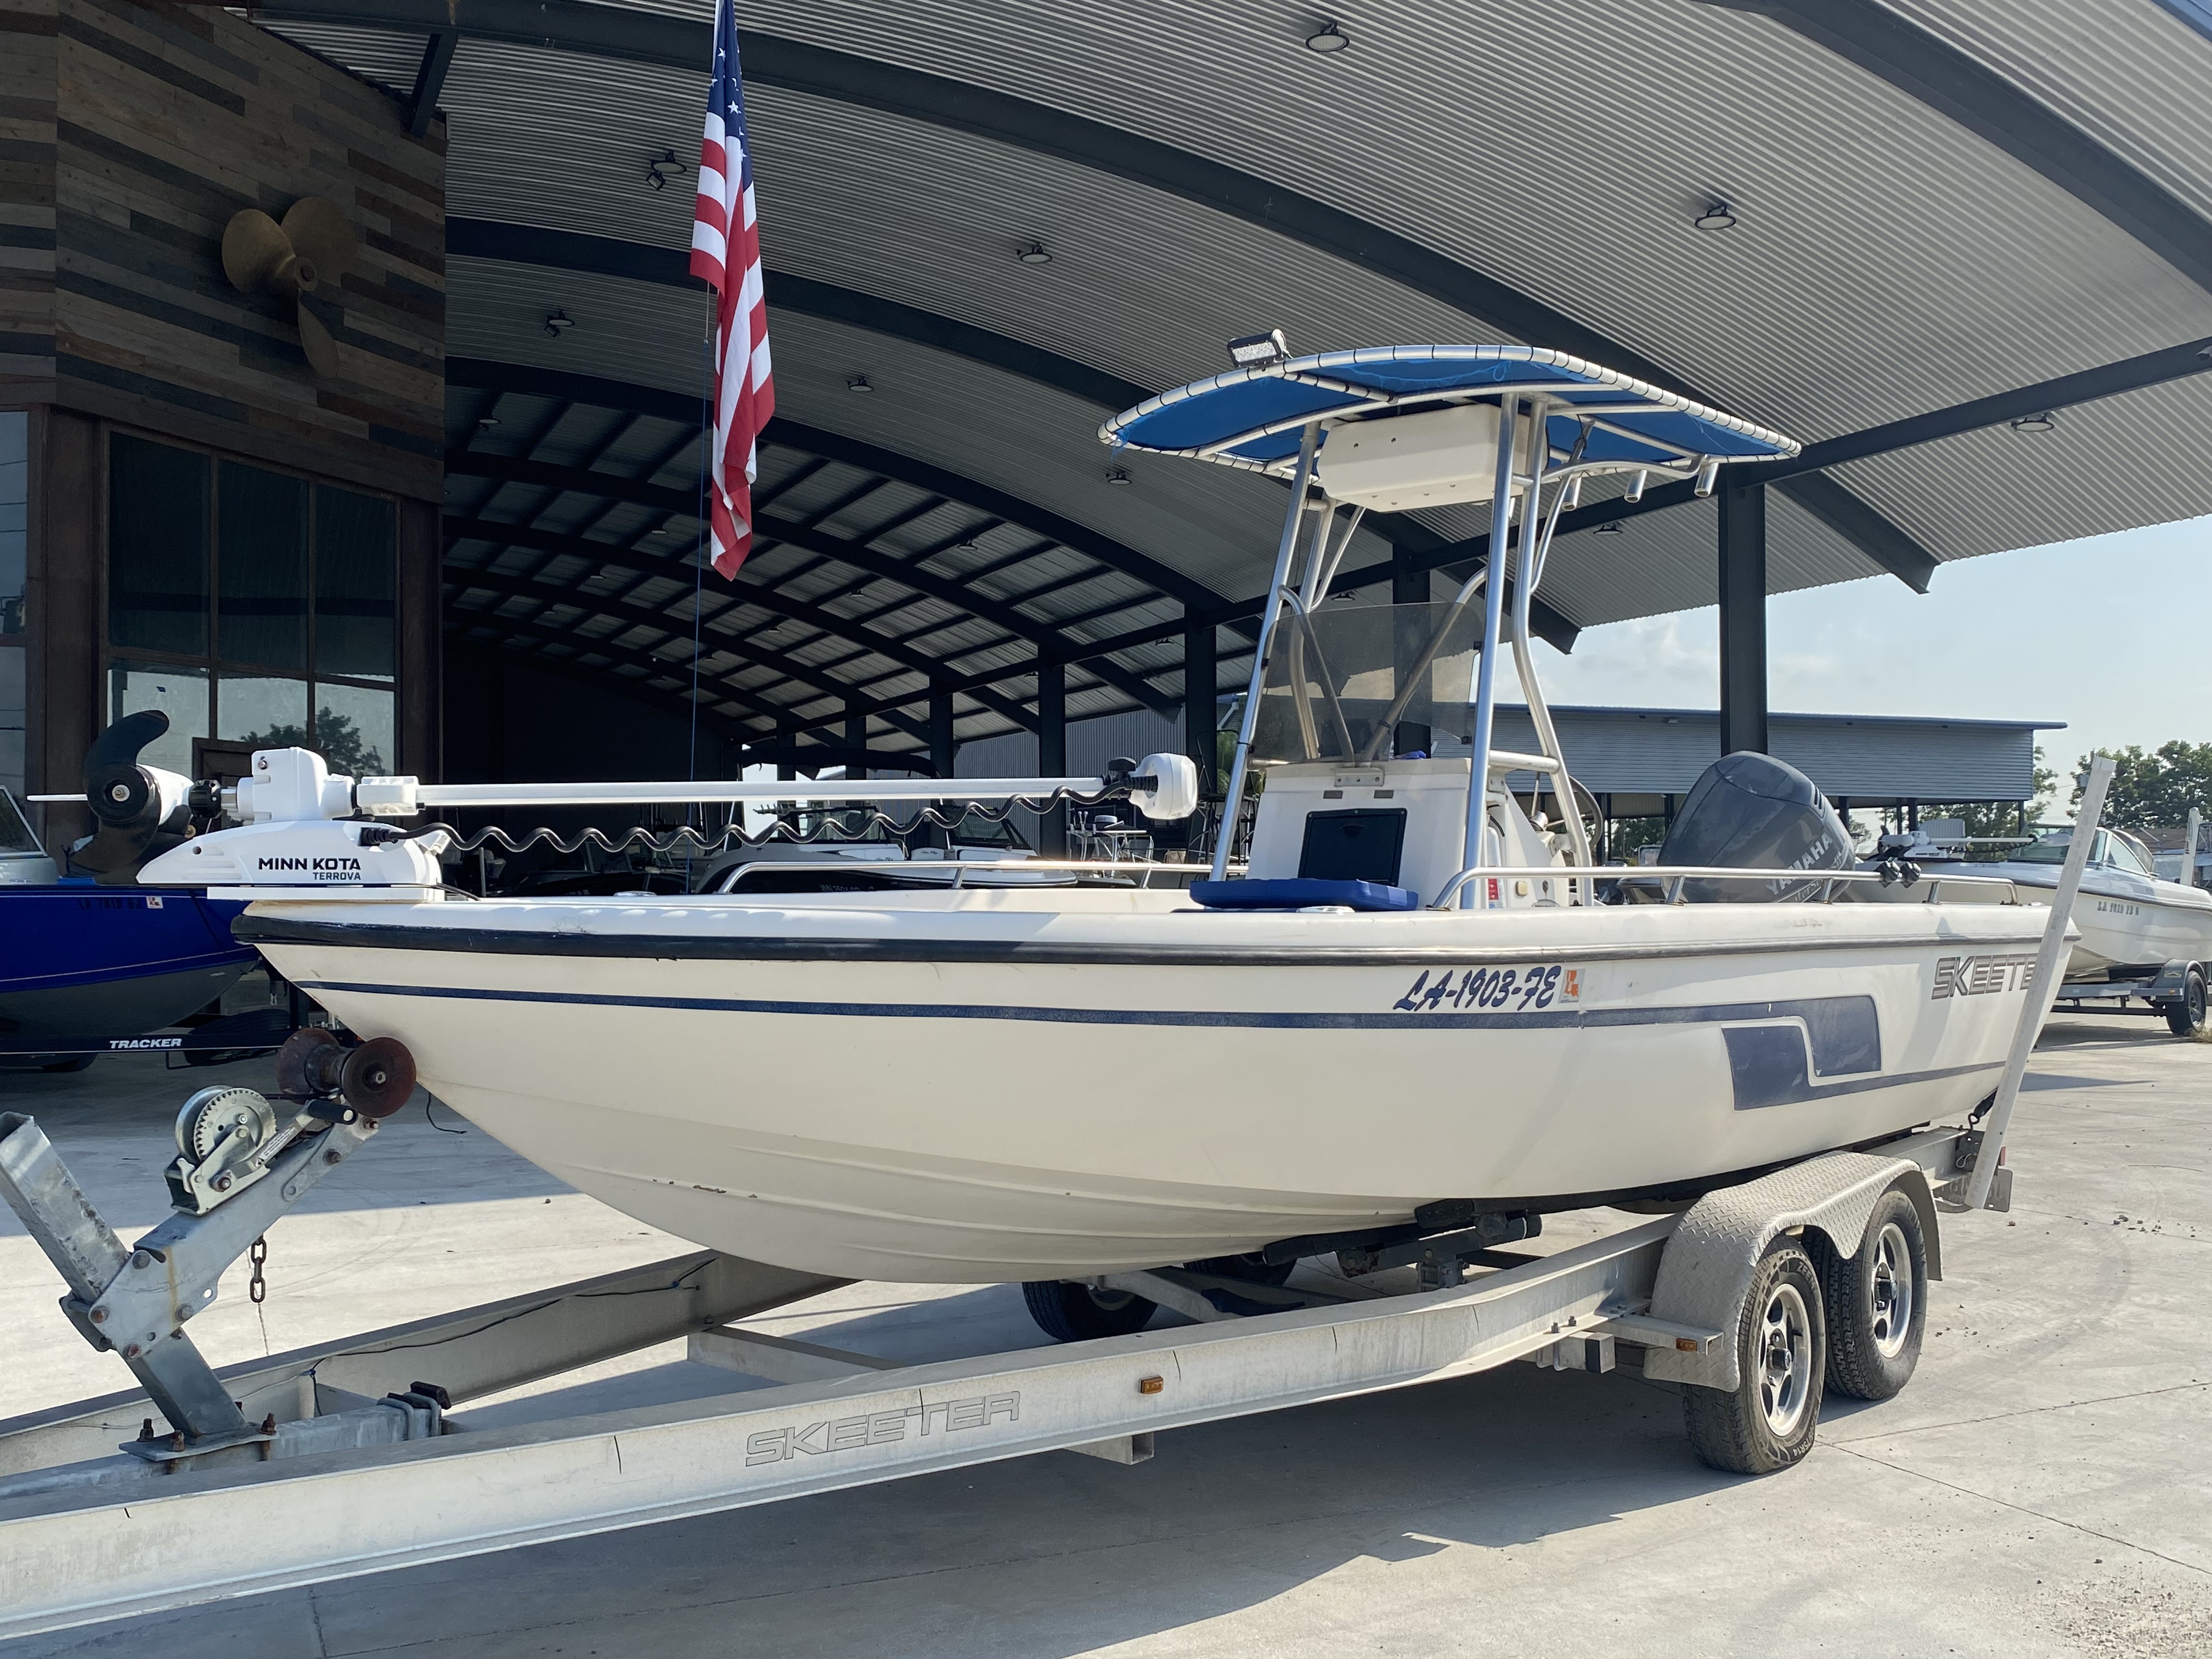 2001 Skeeter boat for sale, model of the boat is ZX22 & Image # 14 of 19